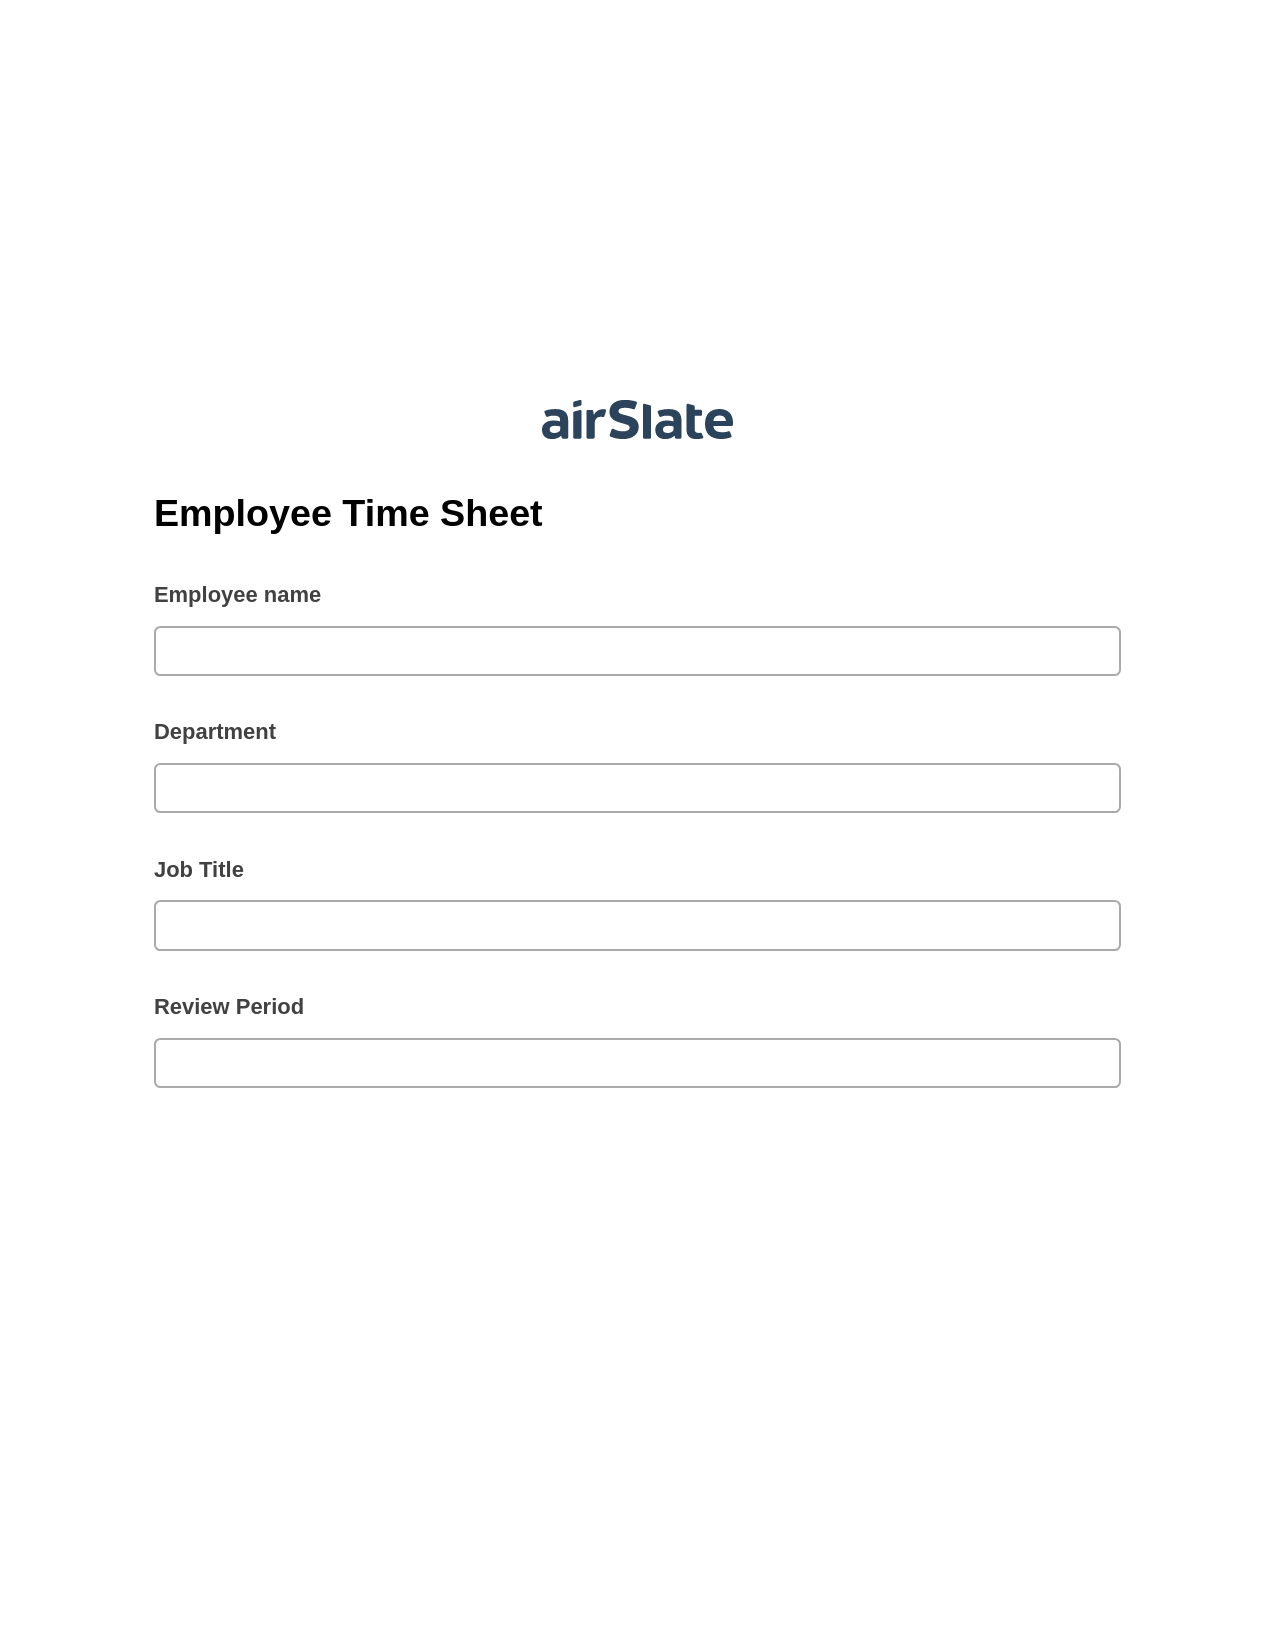 Employee Time Sheet Pre-fill Document Bot, Create slate addon, Export to NetSuite Bot